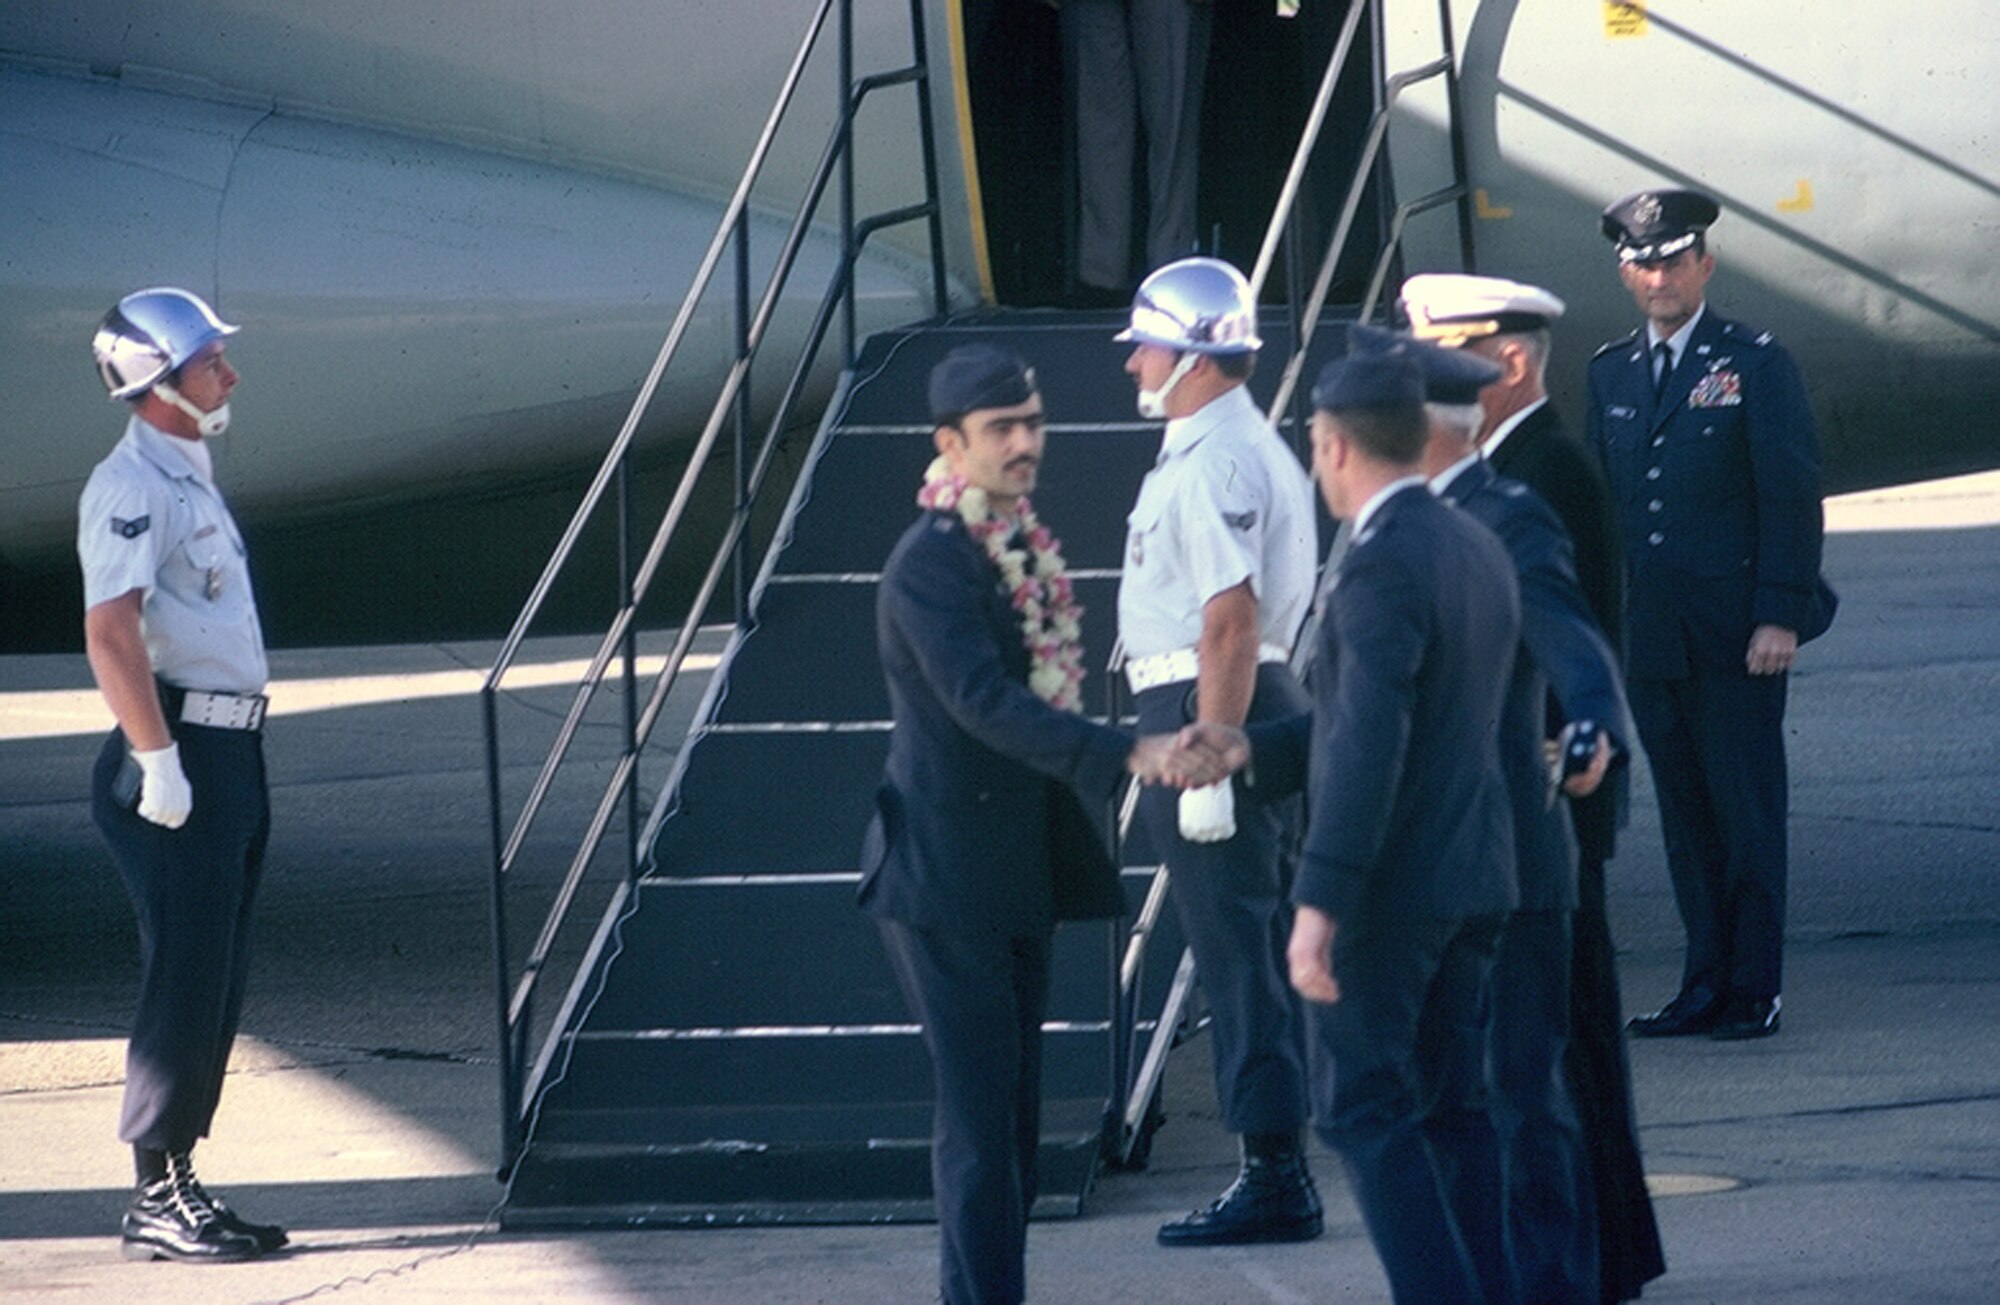 Then-Capt. Lee Ellis arrives at Maxwell Air Force Base, Ala., in 1973, after spending more than five years as a prisoner of war in Vietnam. Ellis shared his tips for reintegration with Air Force reservists and their family members at a Yellow Ribbon event in San Diego on Feb. 25, 2012. (Courtesy photo)